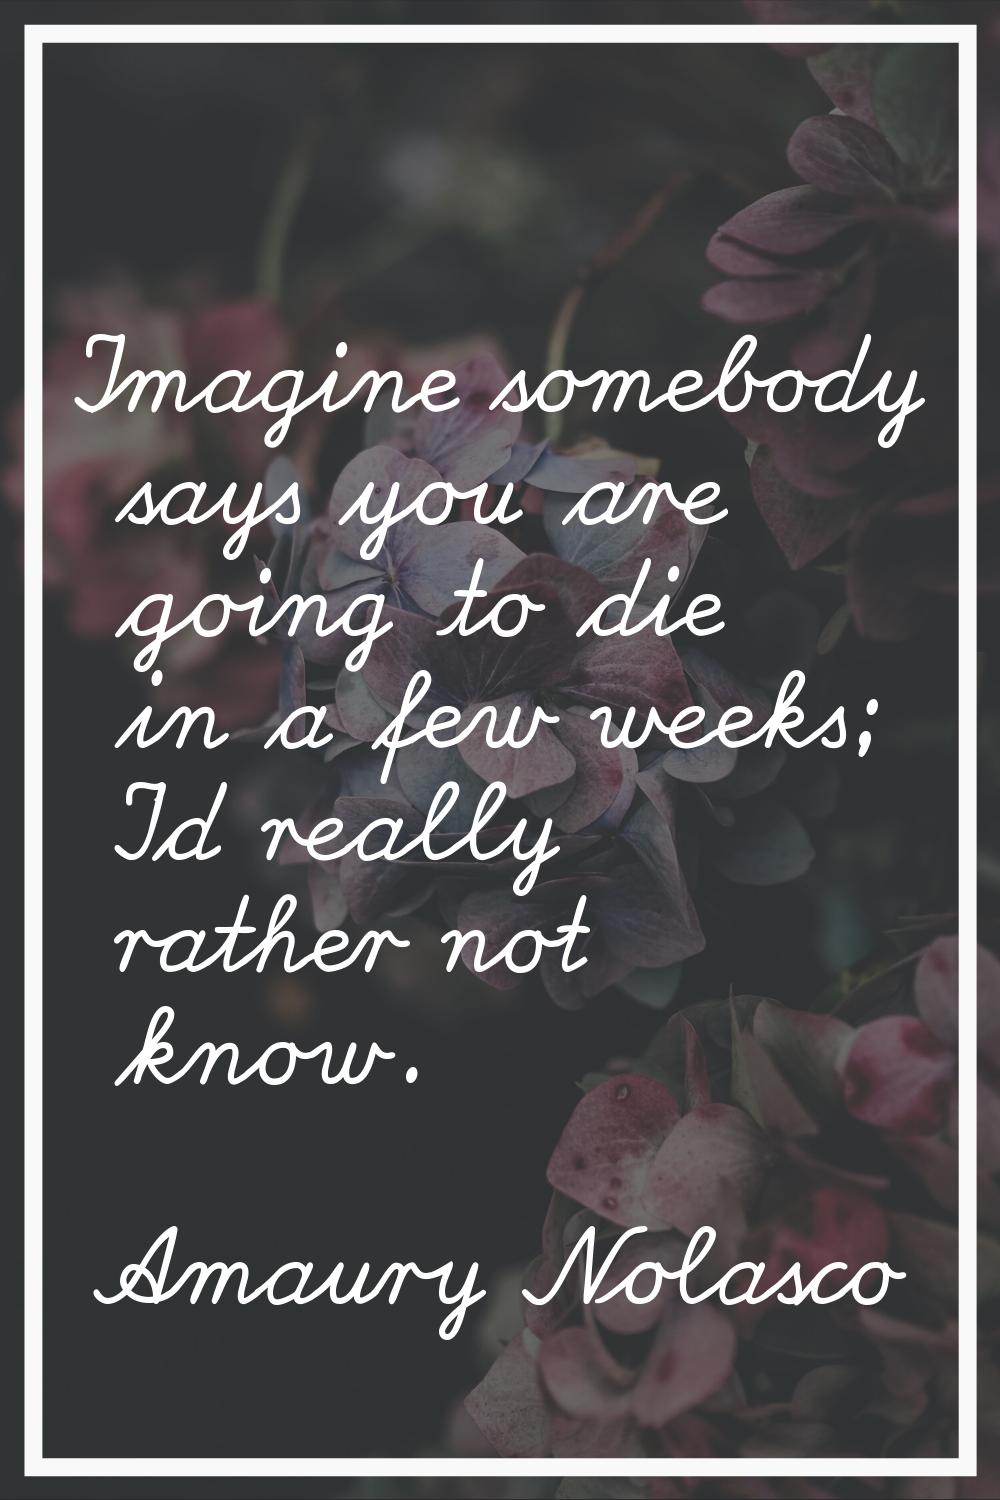 Imagine somebody says you are going to die in a few weeks; I'd really rather not know.